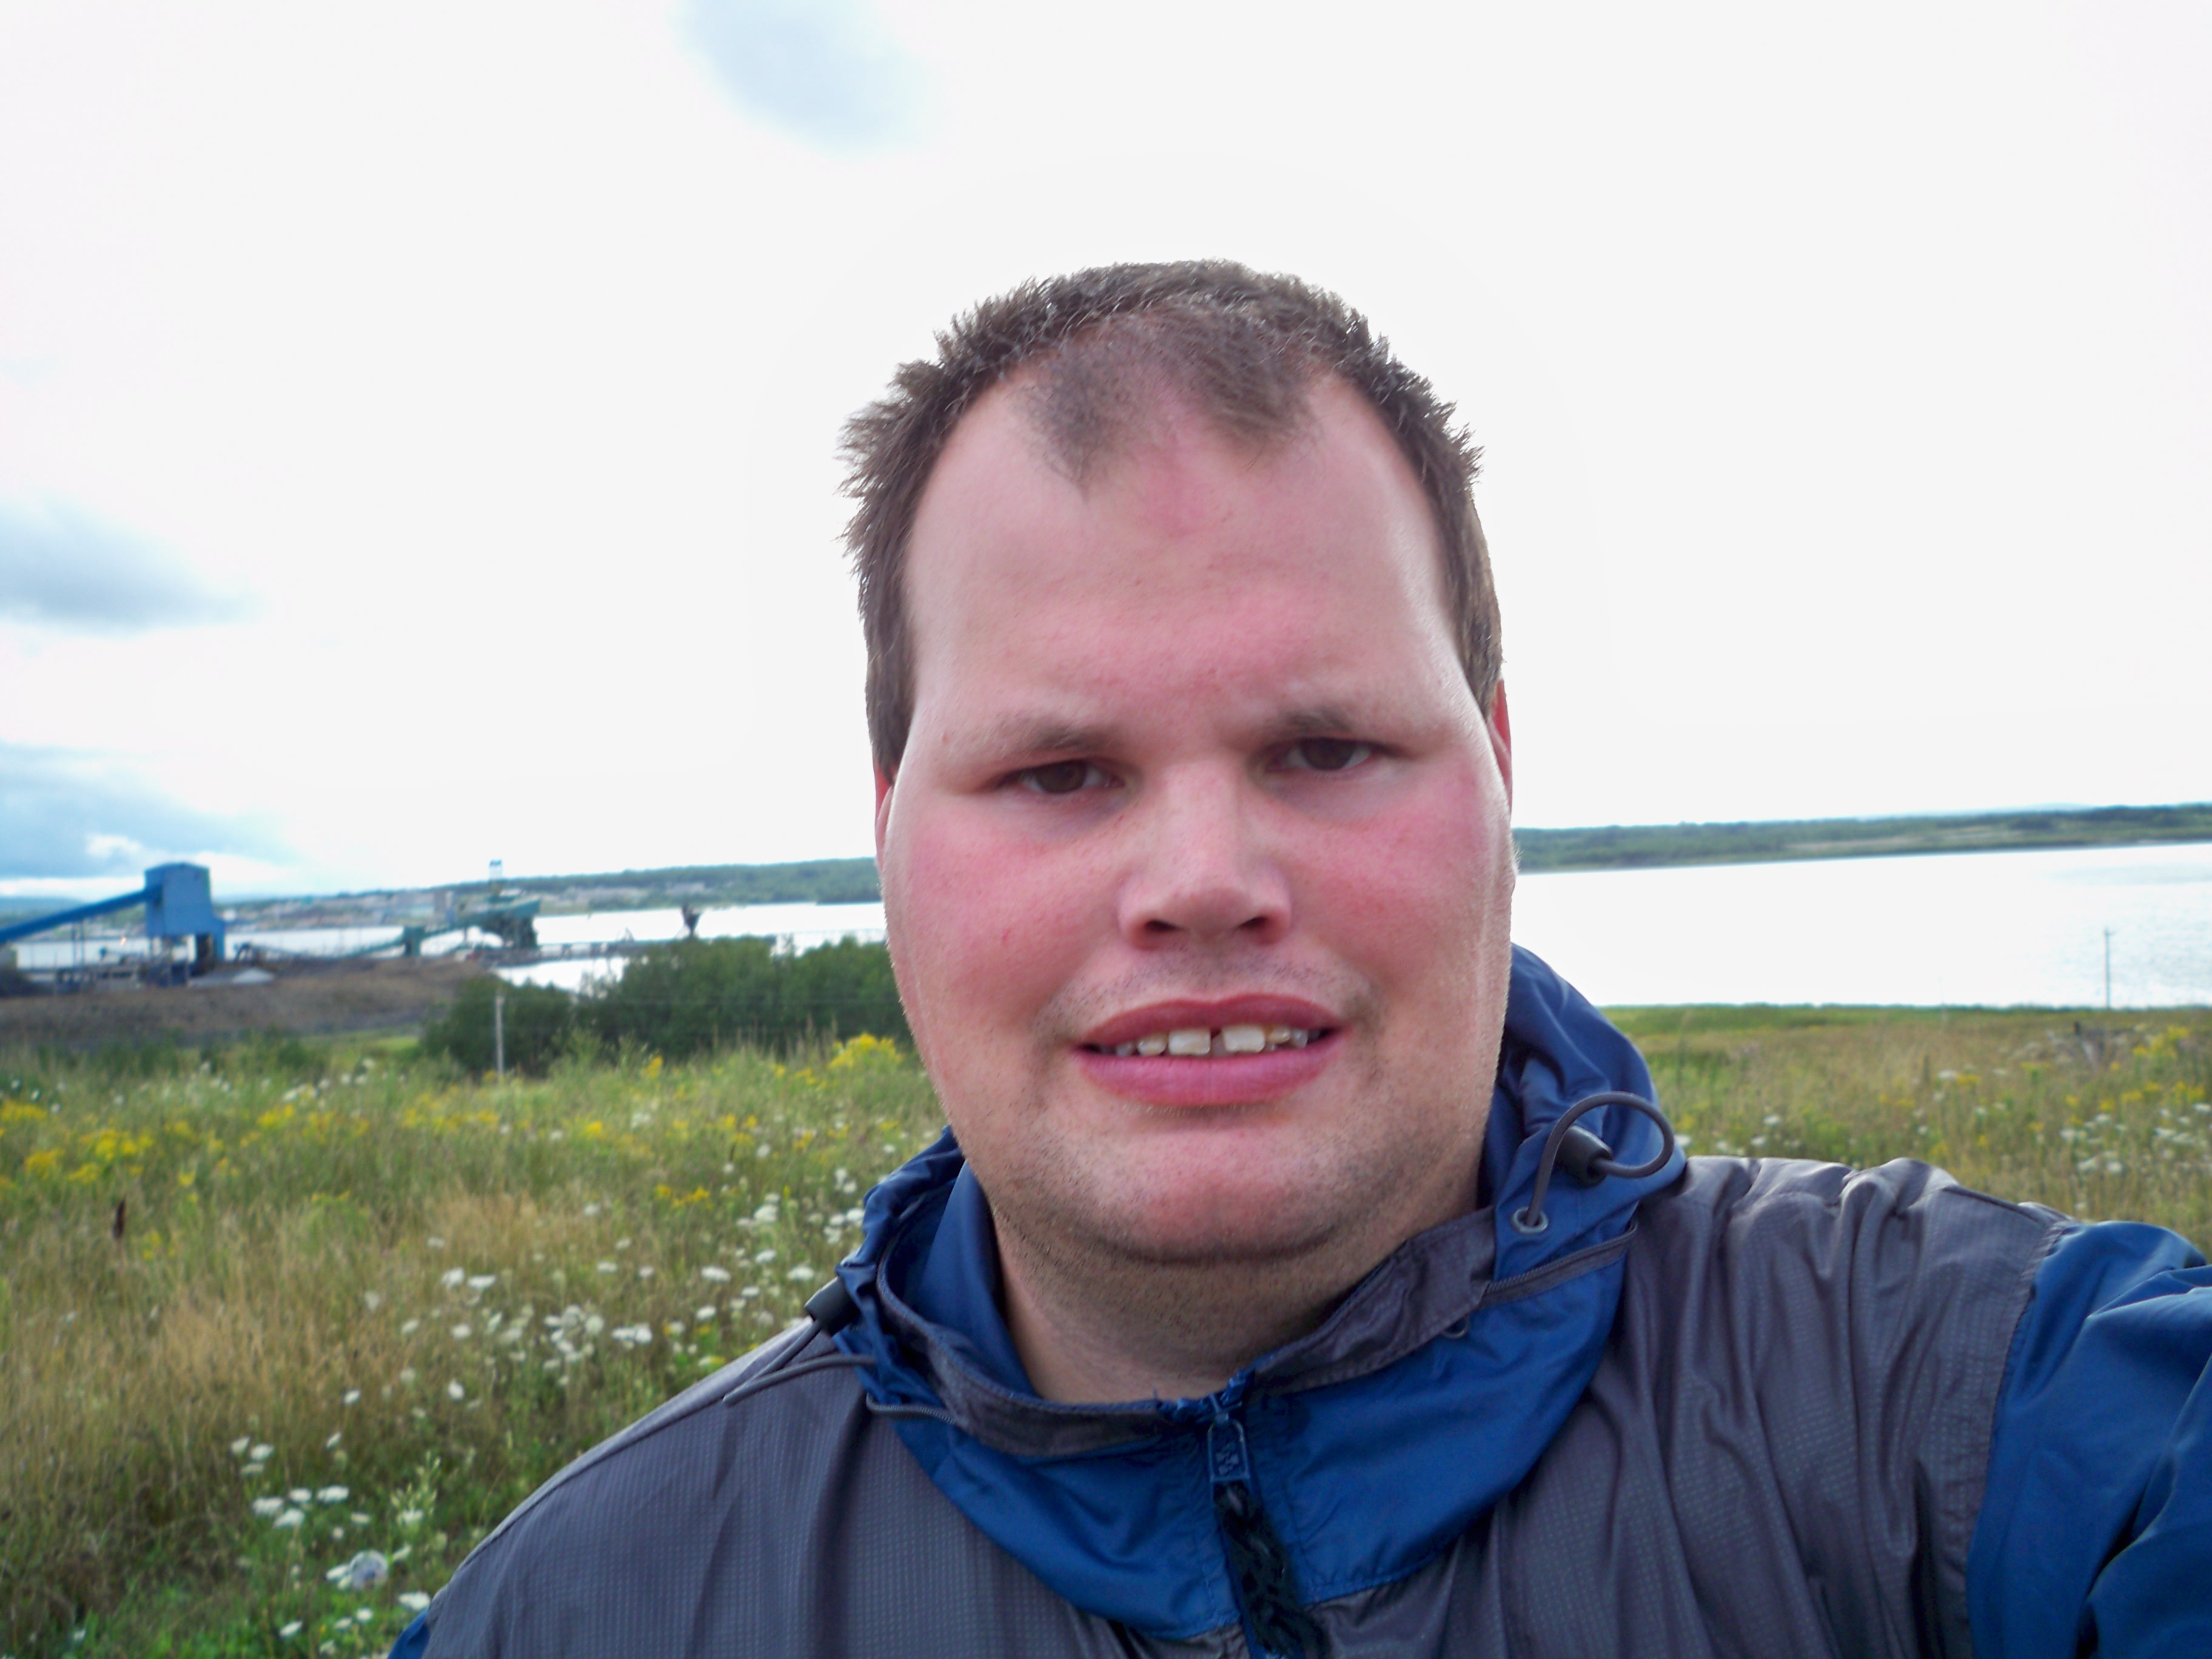 Frankie MacDonald enjoying my Fresh Air during the Windy and Cool day with some Clouds up in the Sky